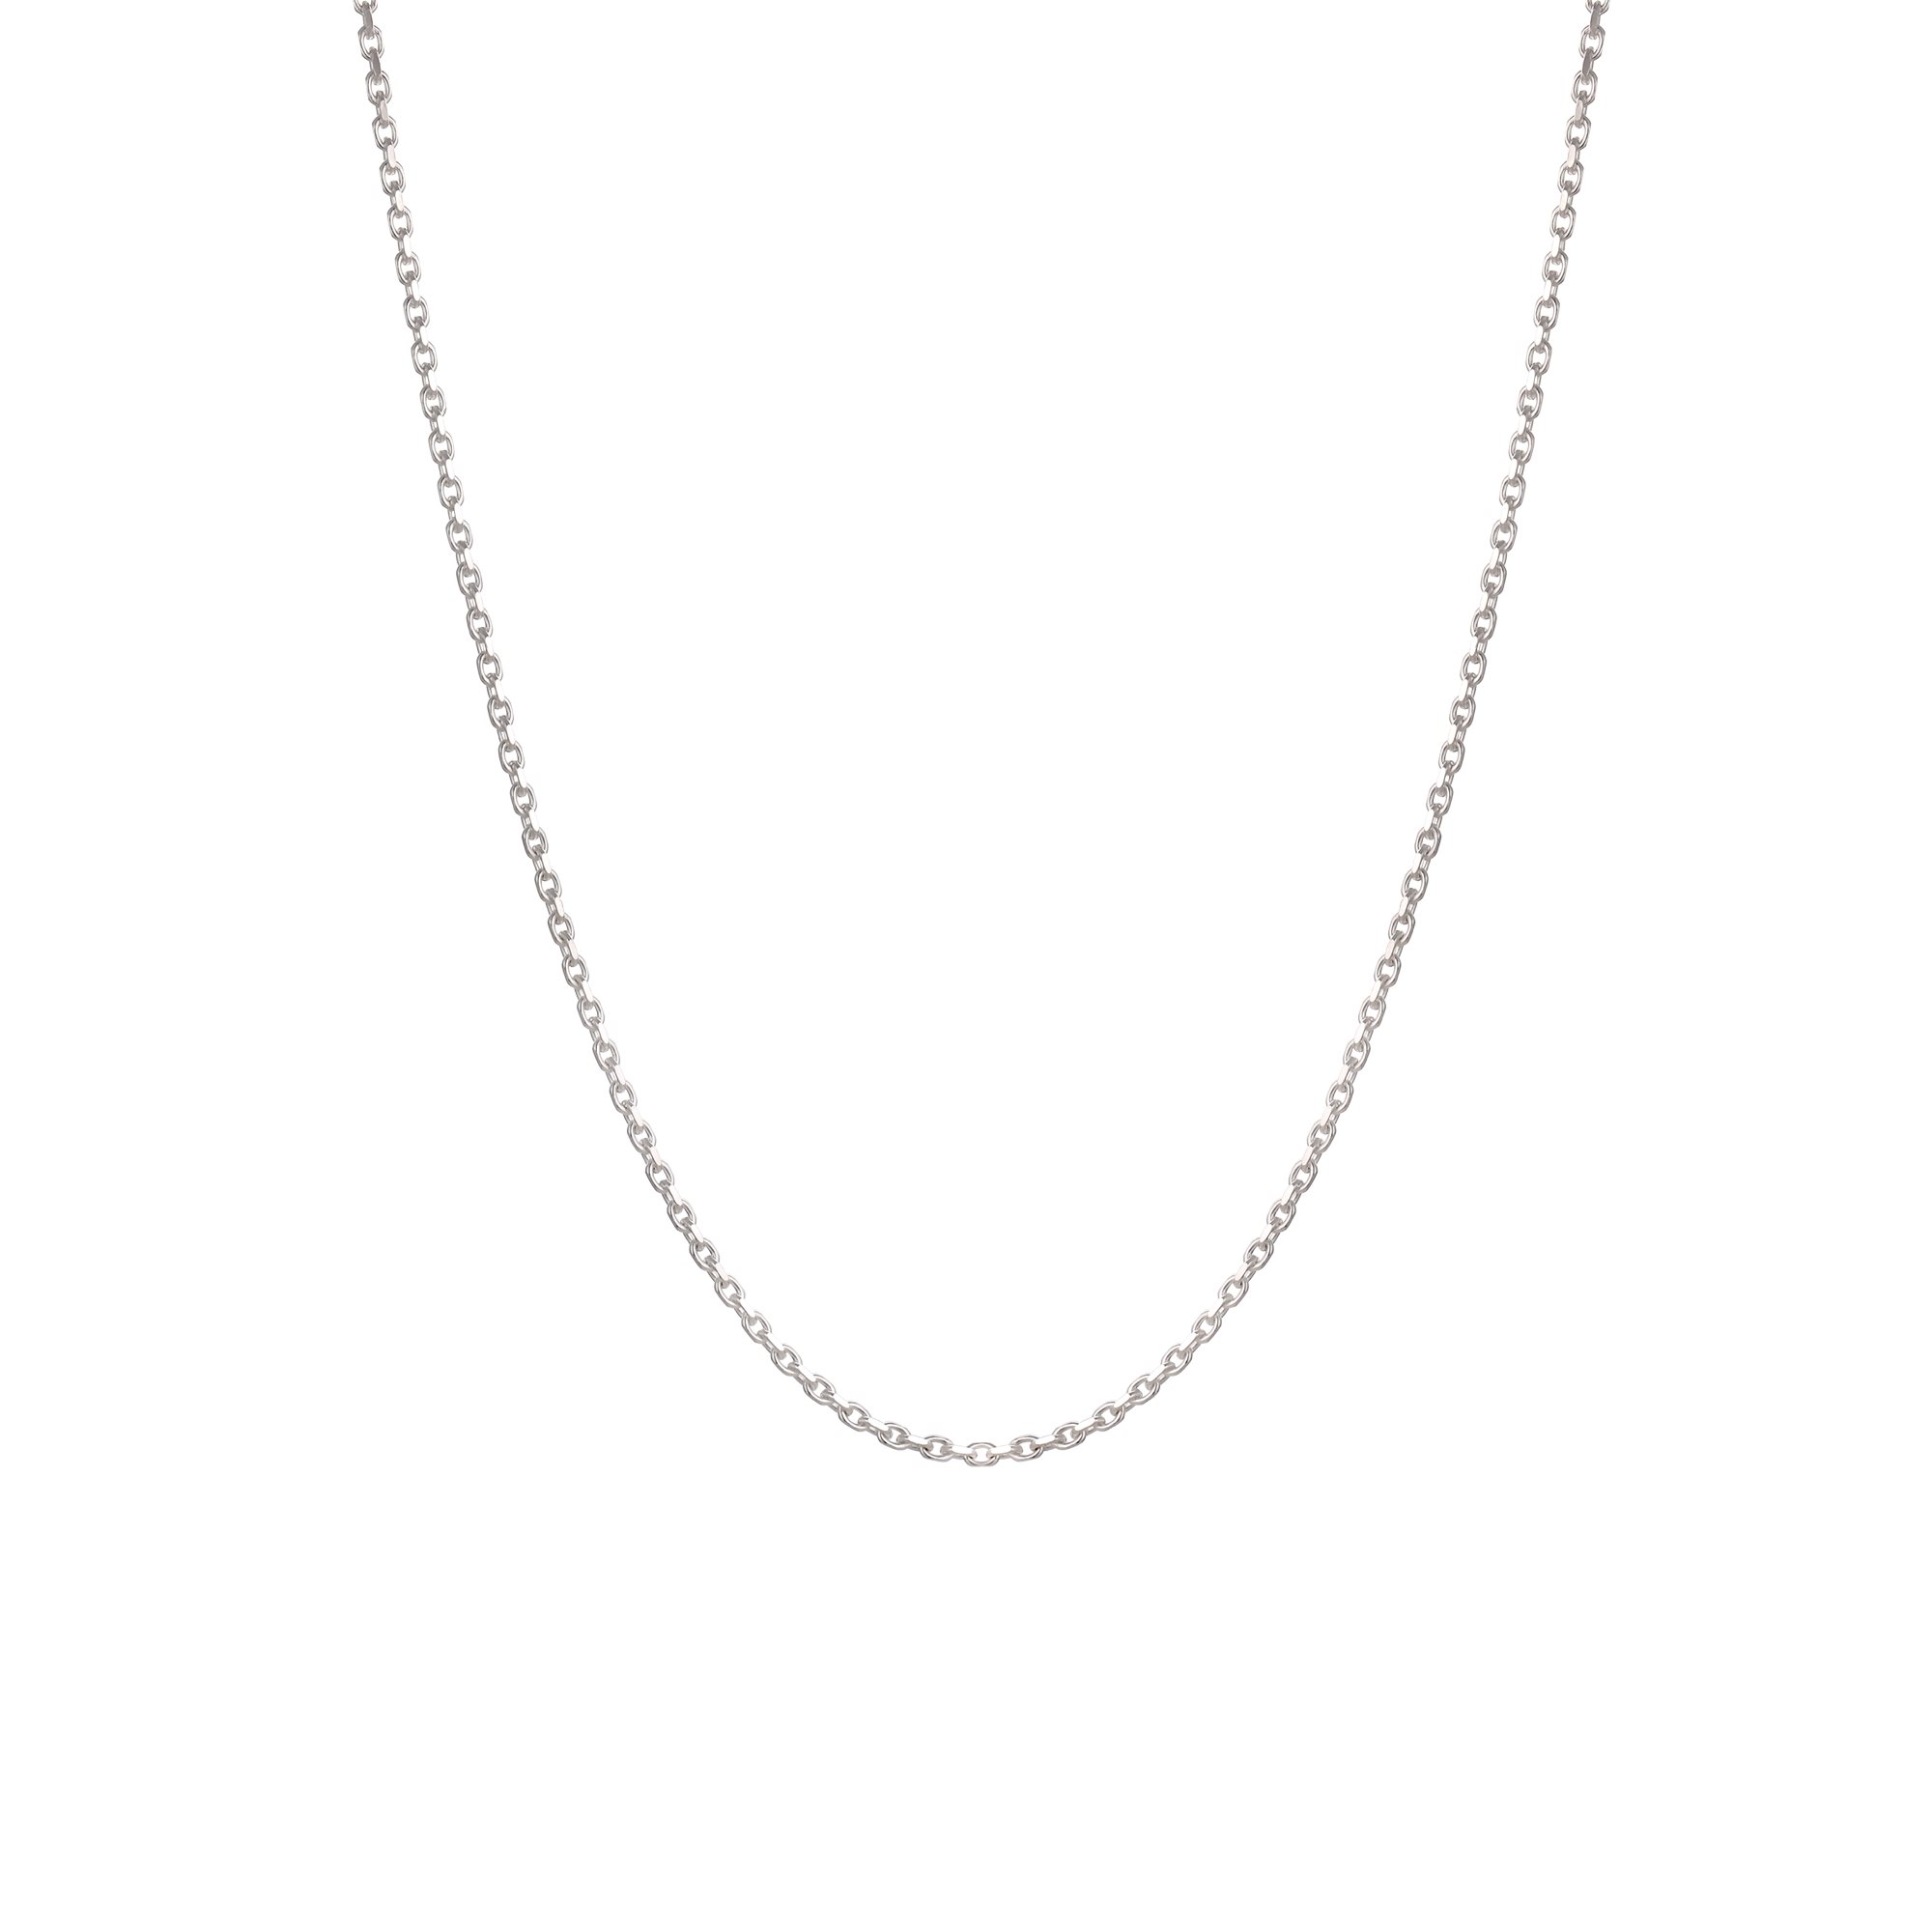 YAB STUDIO Accessories CONNECTED CHAIN 1 Silver